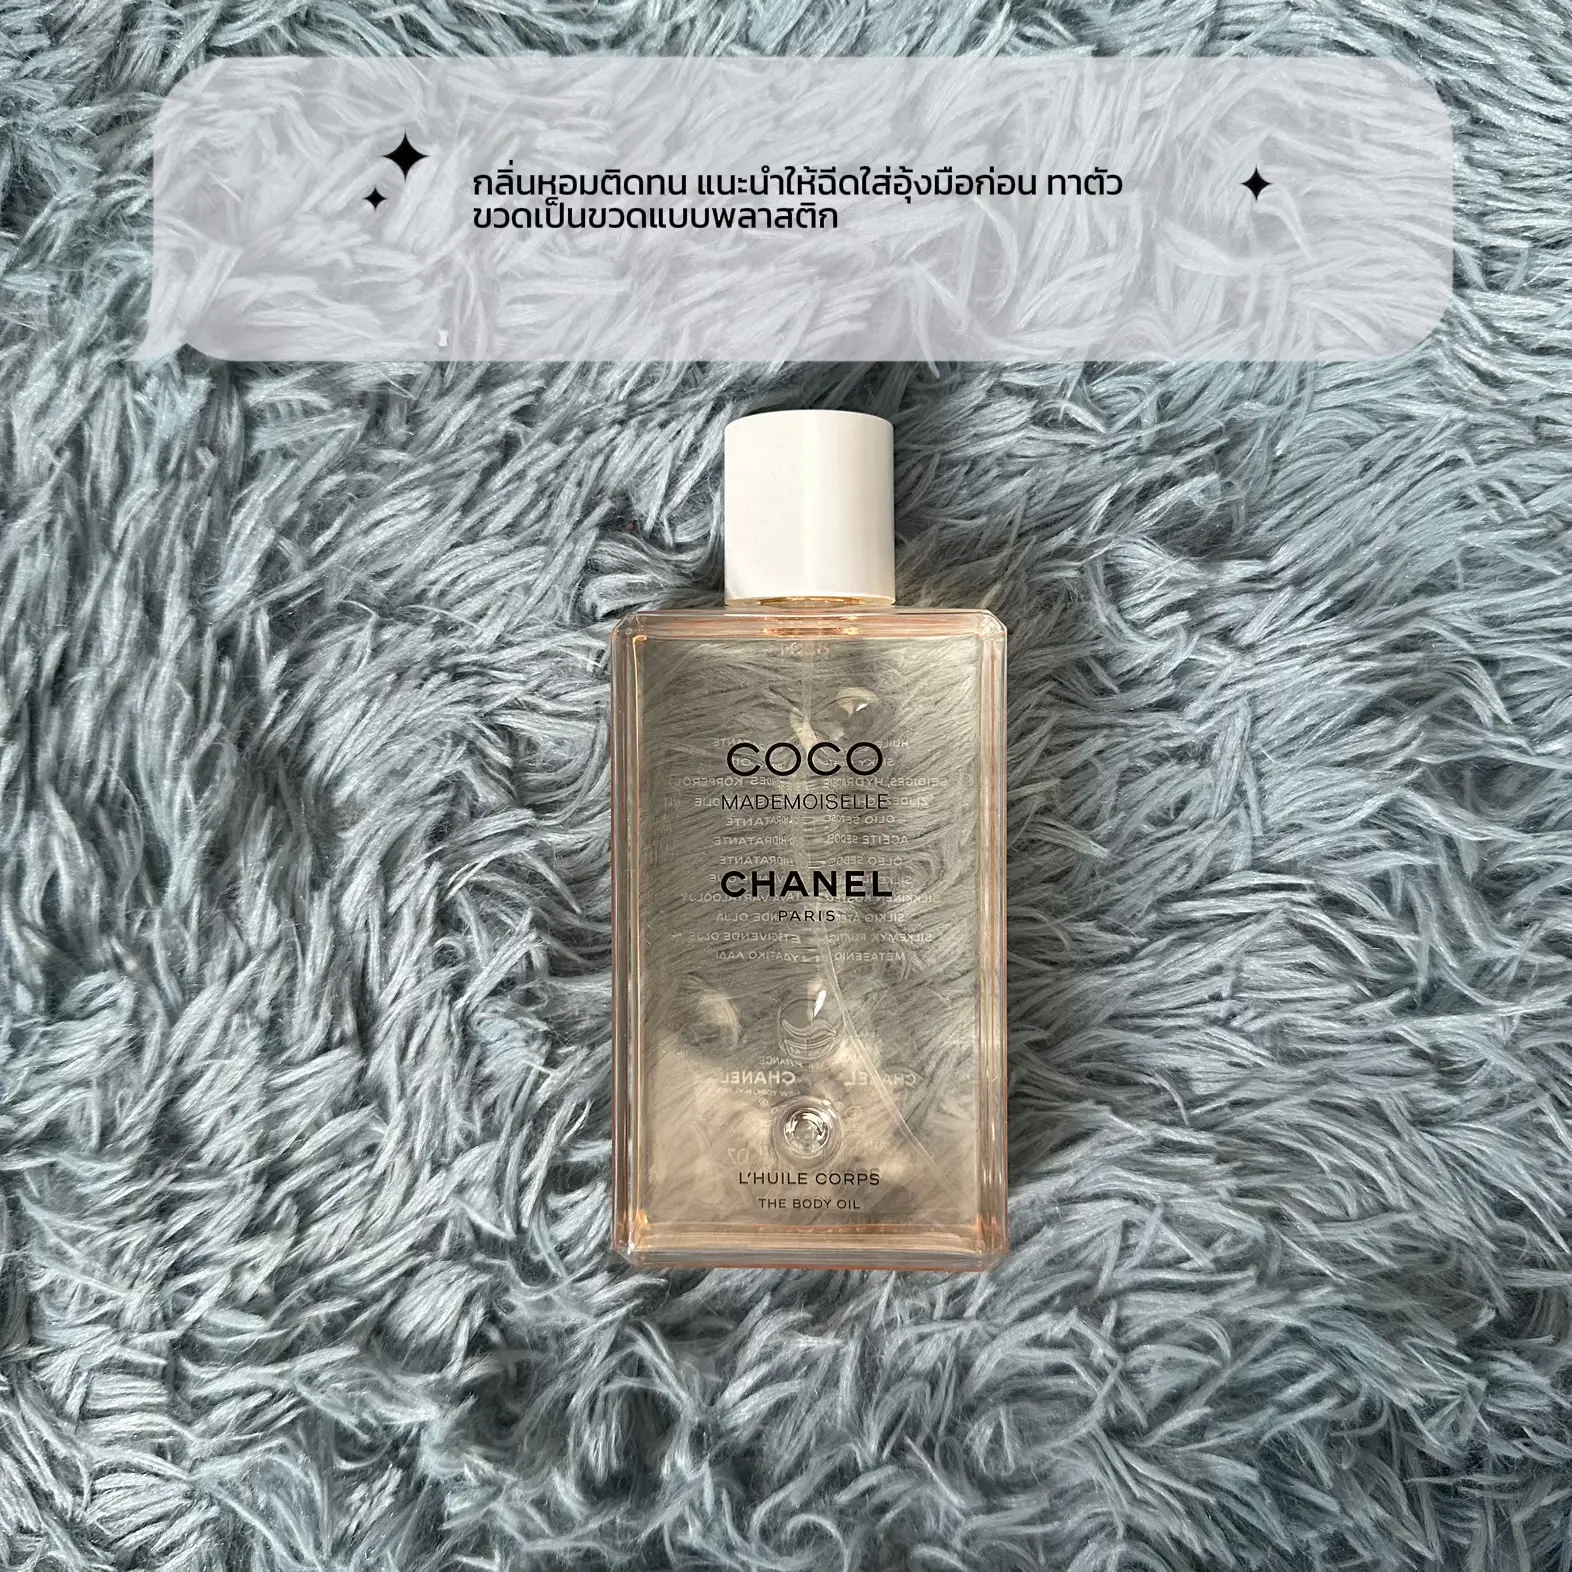 COCO CHANEL BODY OIL REVIEW  Gallery posted by Isandgrlsecret